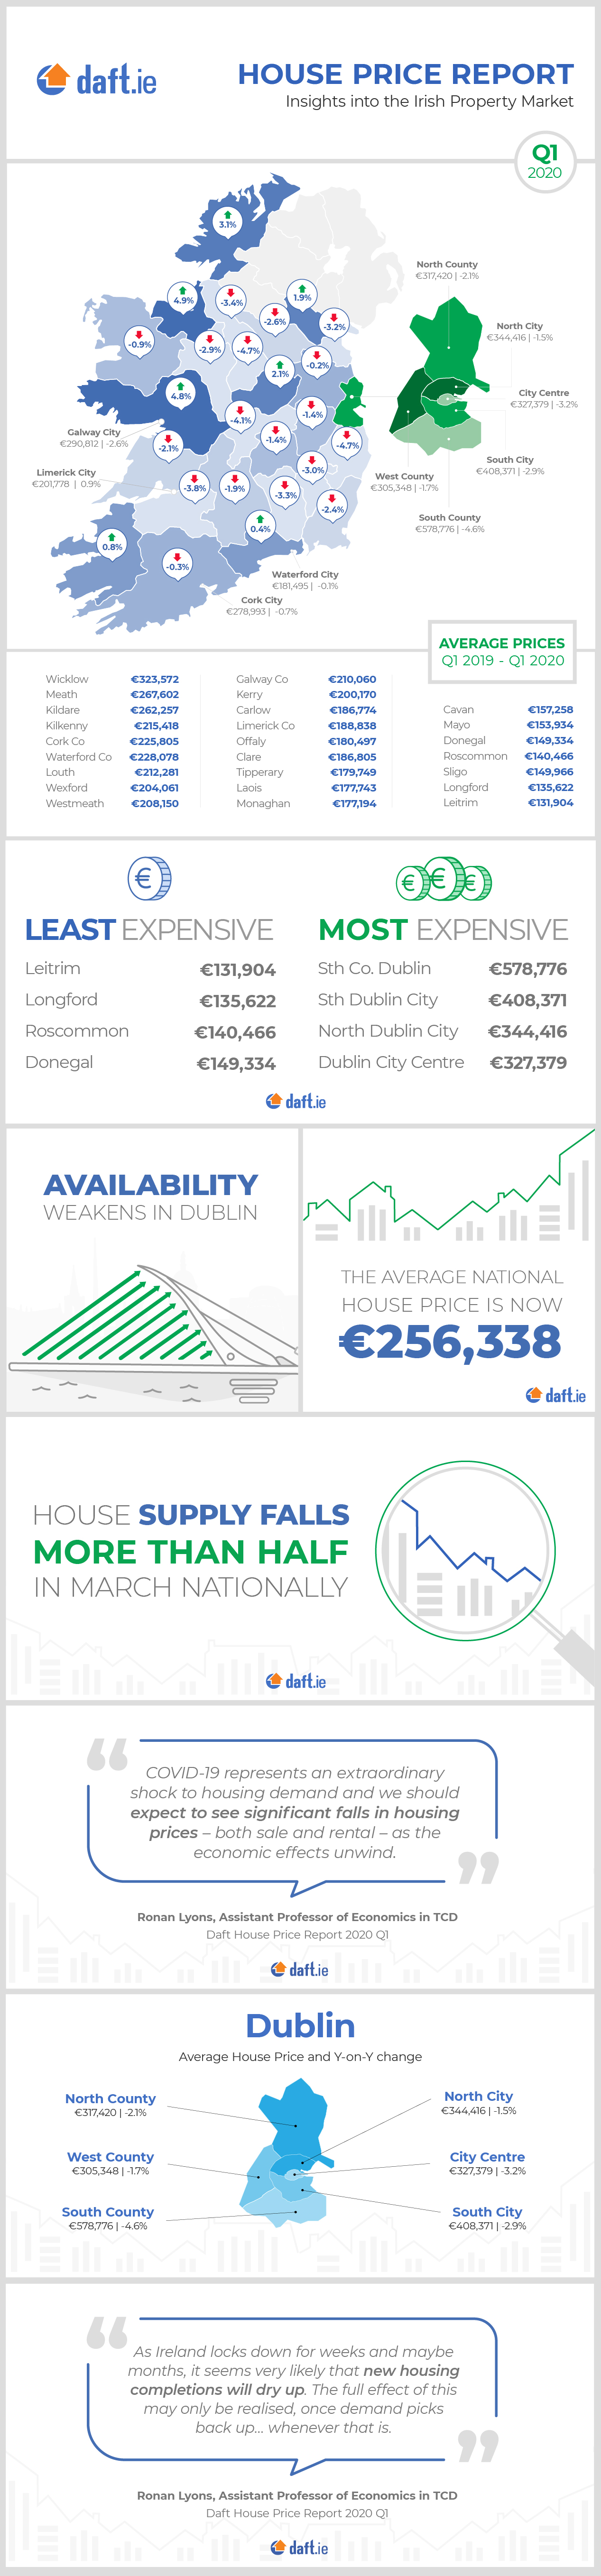 Daft.ie House Price Report: Q1 2020 Infographic